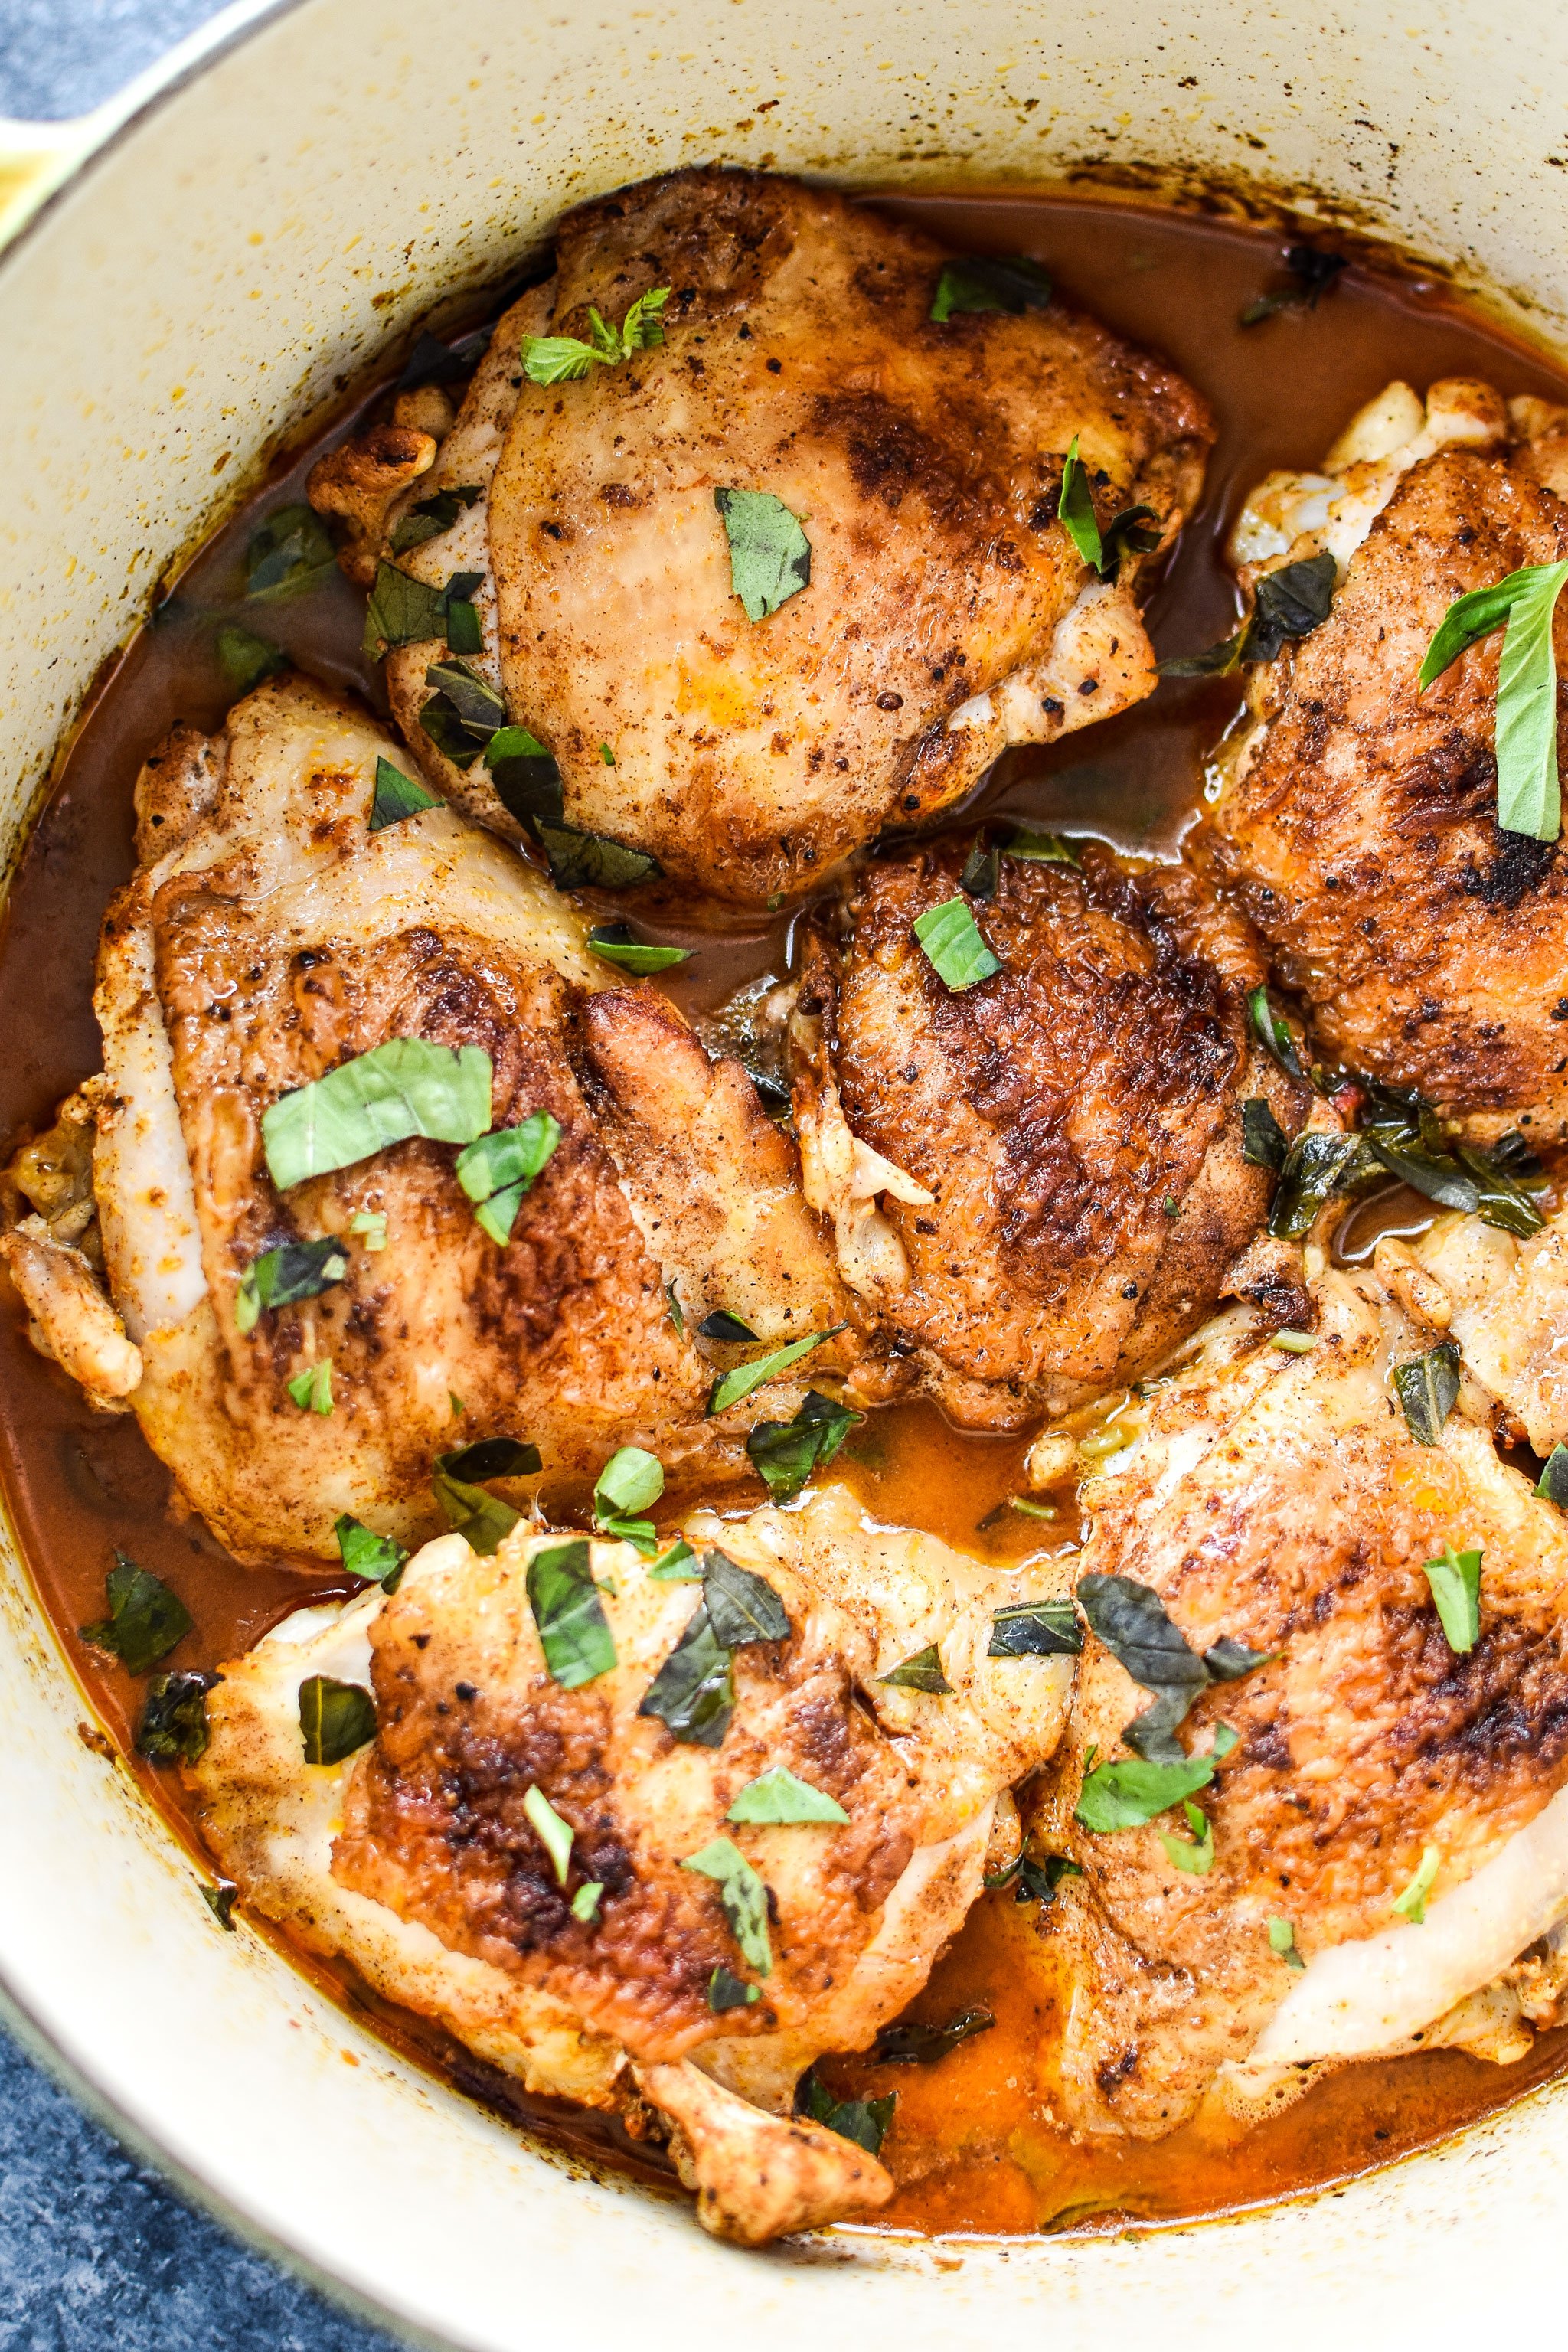 Hot Basil Coconut Braised Chicken Thighs - Project Meal Plan